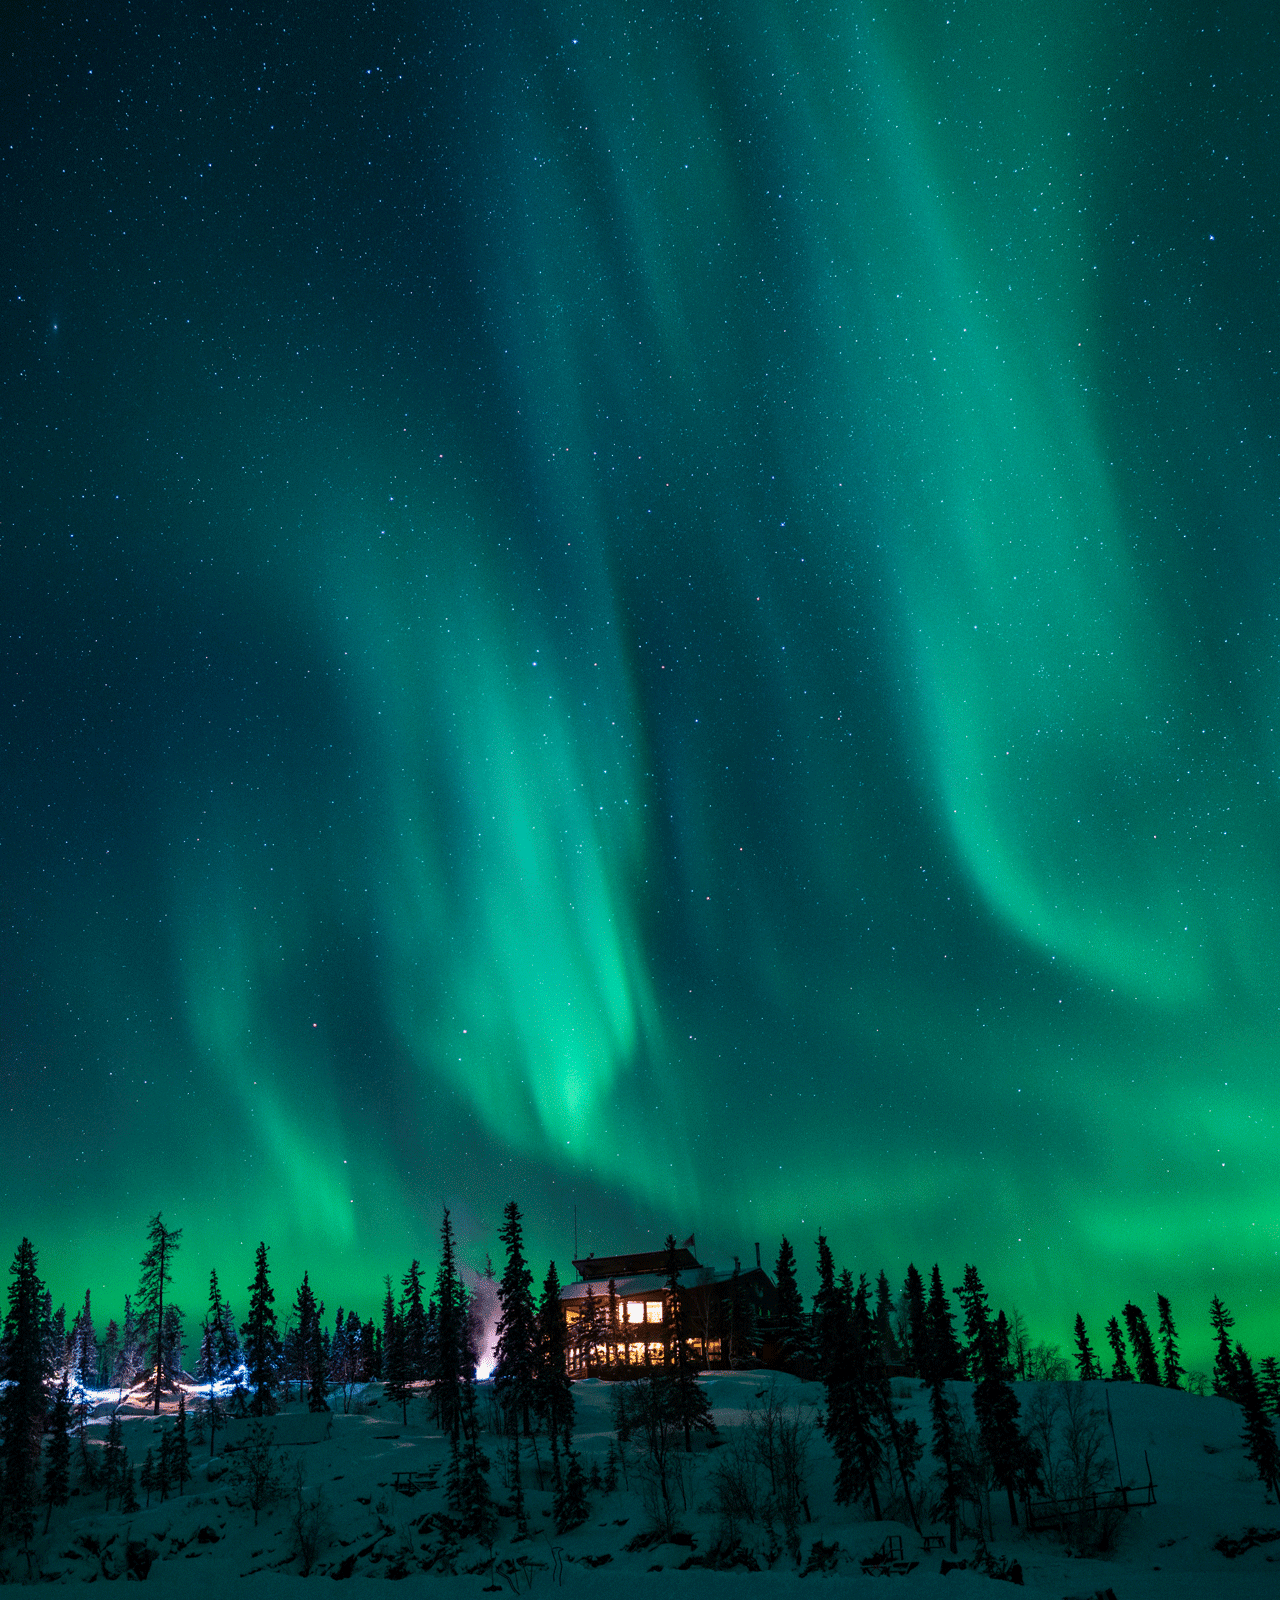 A beautiful display of the Northern Lights (Aurora Borealis) illuminates the night sky above a remote cabin surrounded by trees and snow. The vivid green lights arc gracefully across a star-studded sky, creating a serene and enchanting scene.